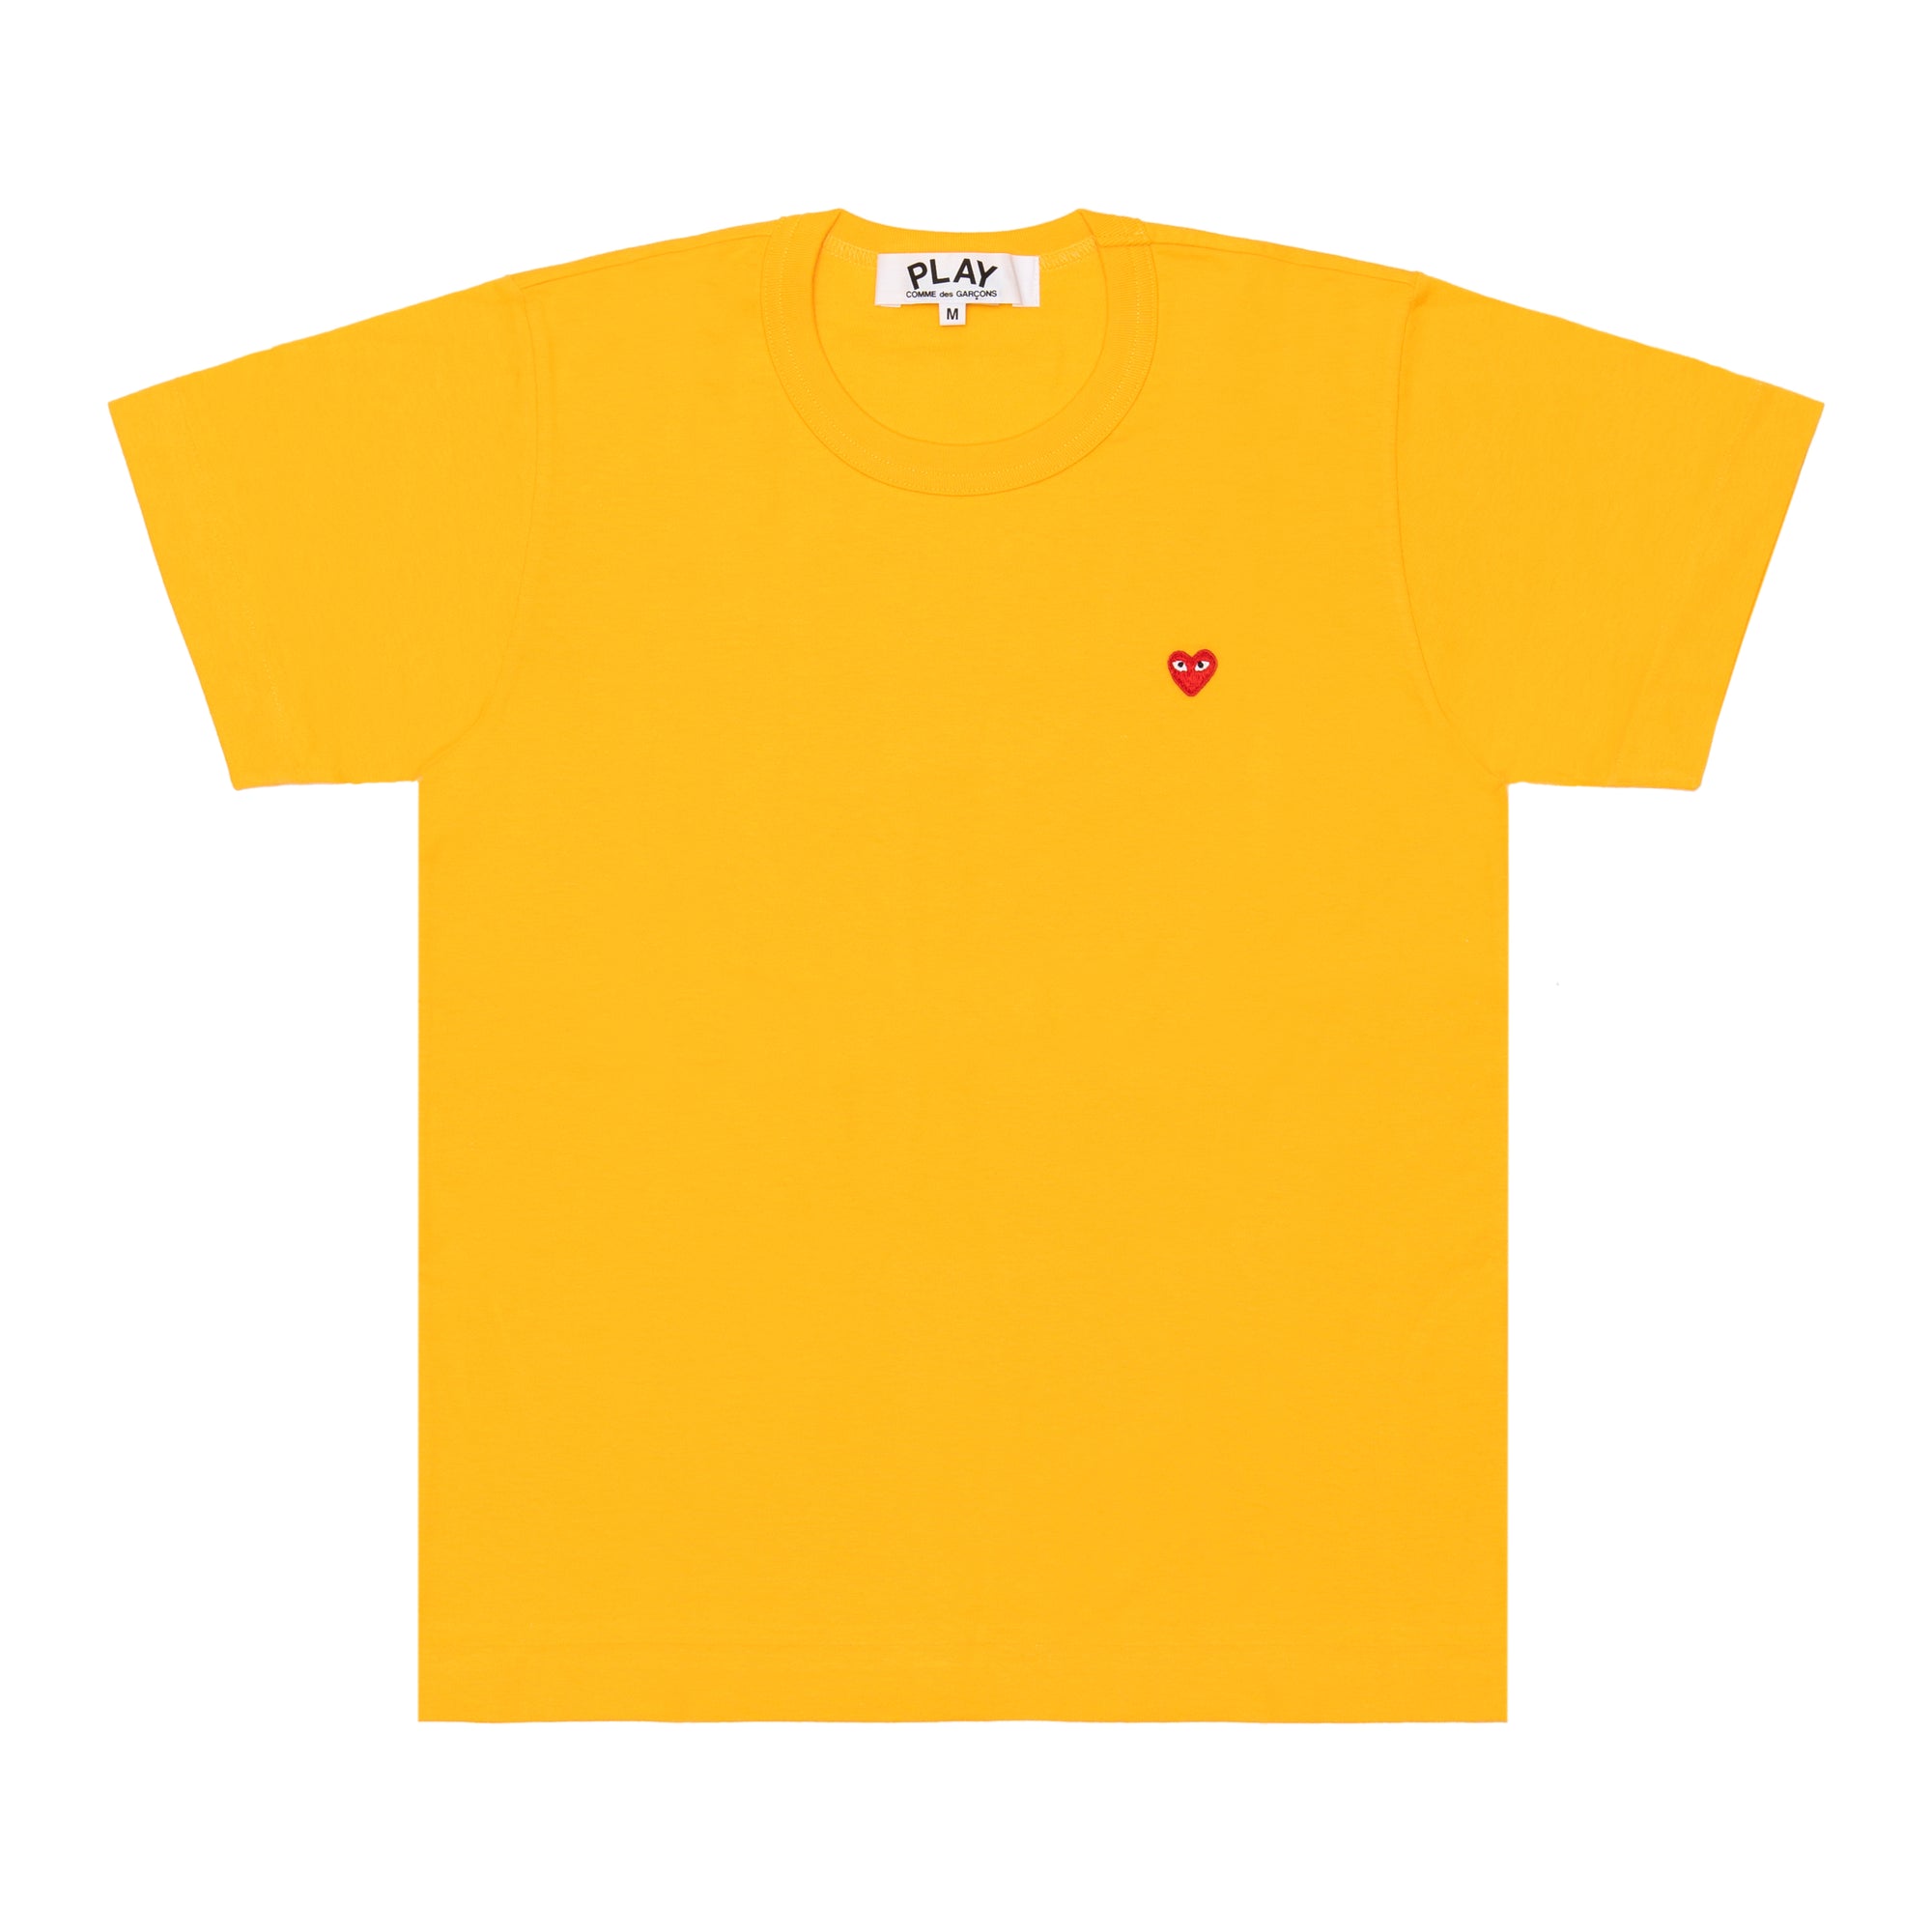 PLAY CDG - Small Red Heart S/S T-Shirt - (Yellow) view 1